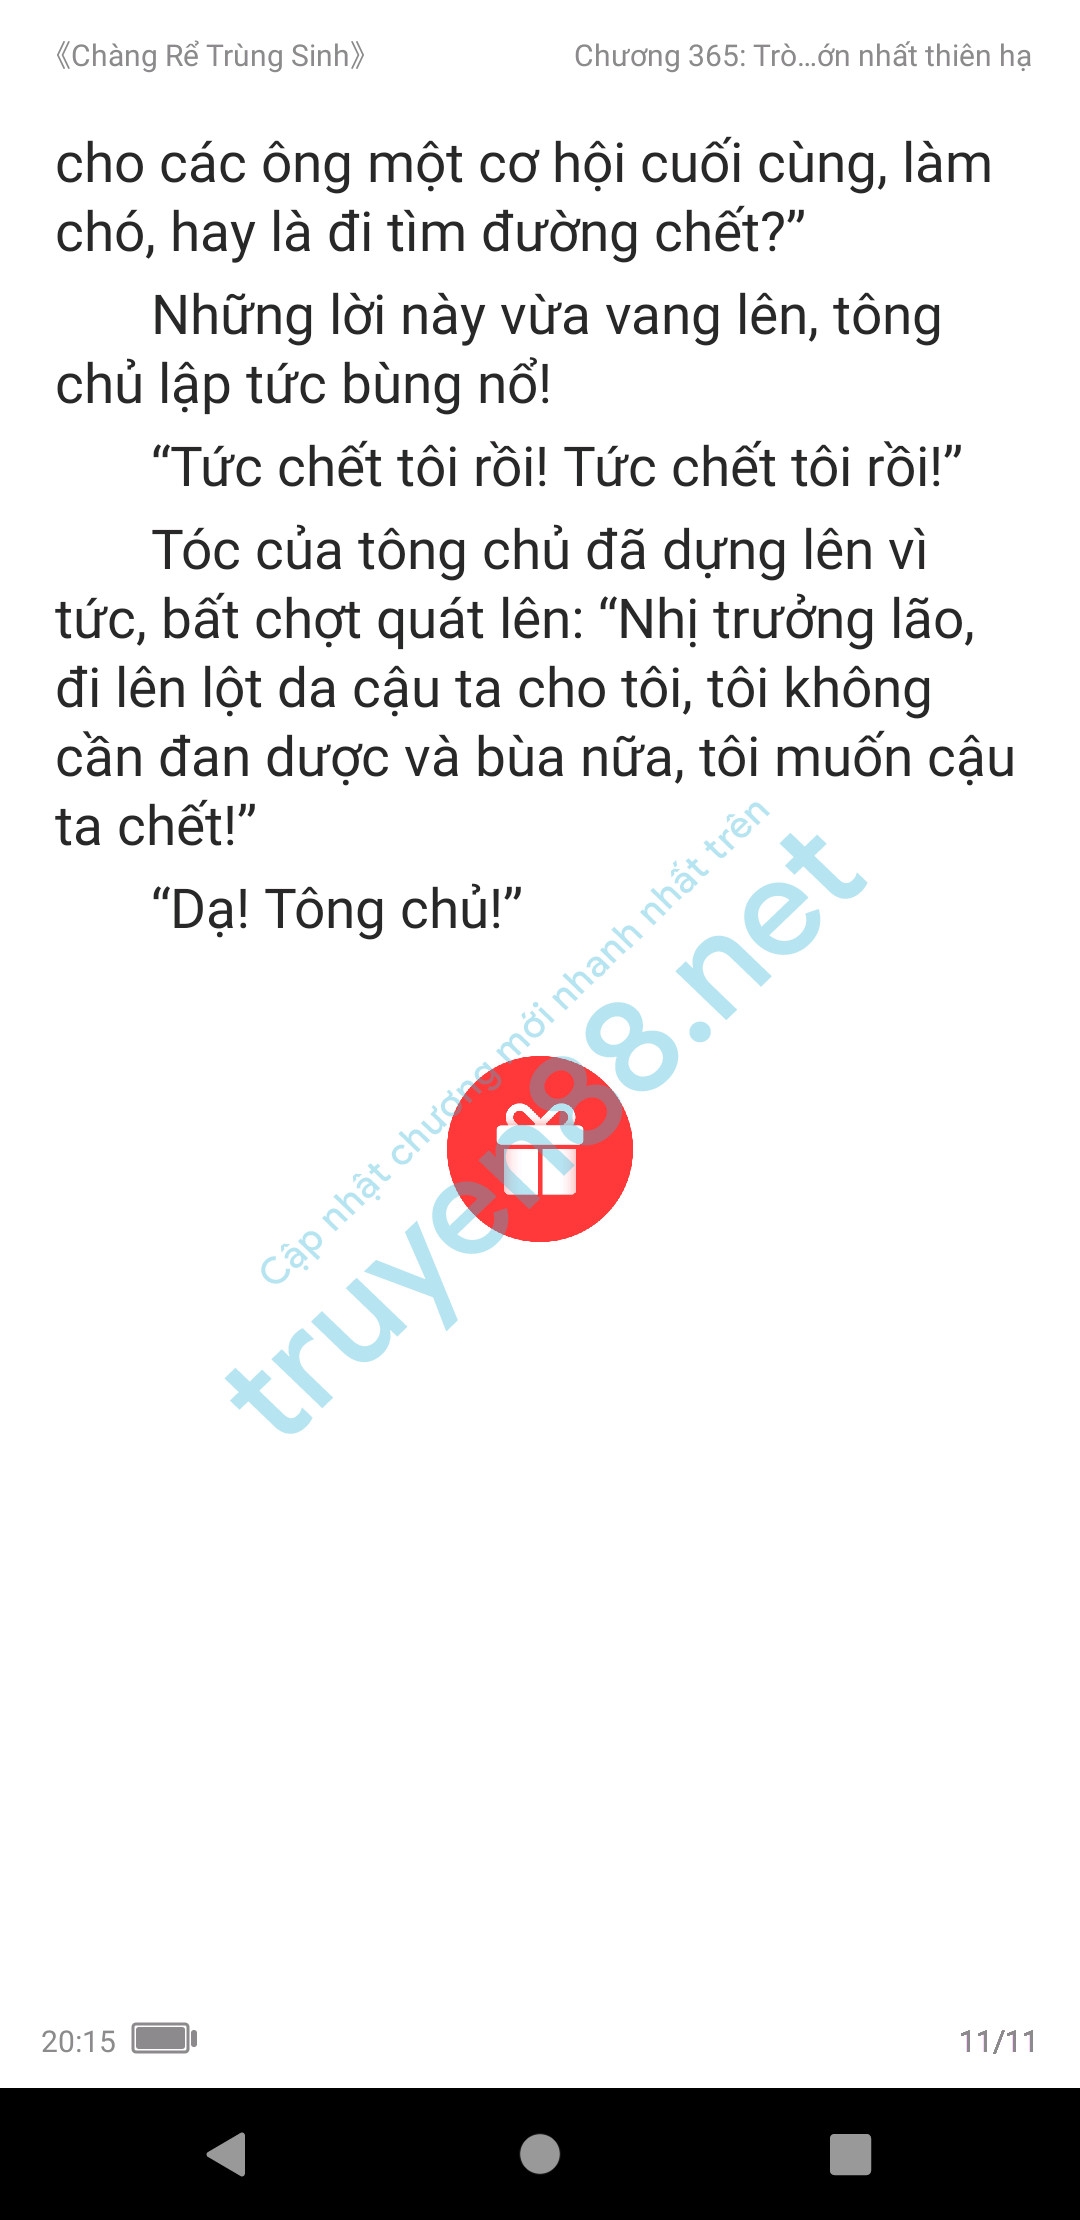 chang-re-trung-sinh-365-1